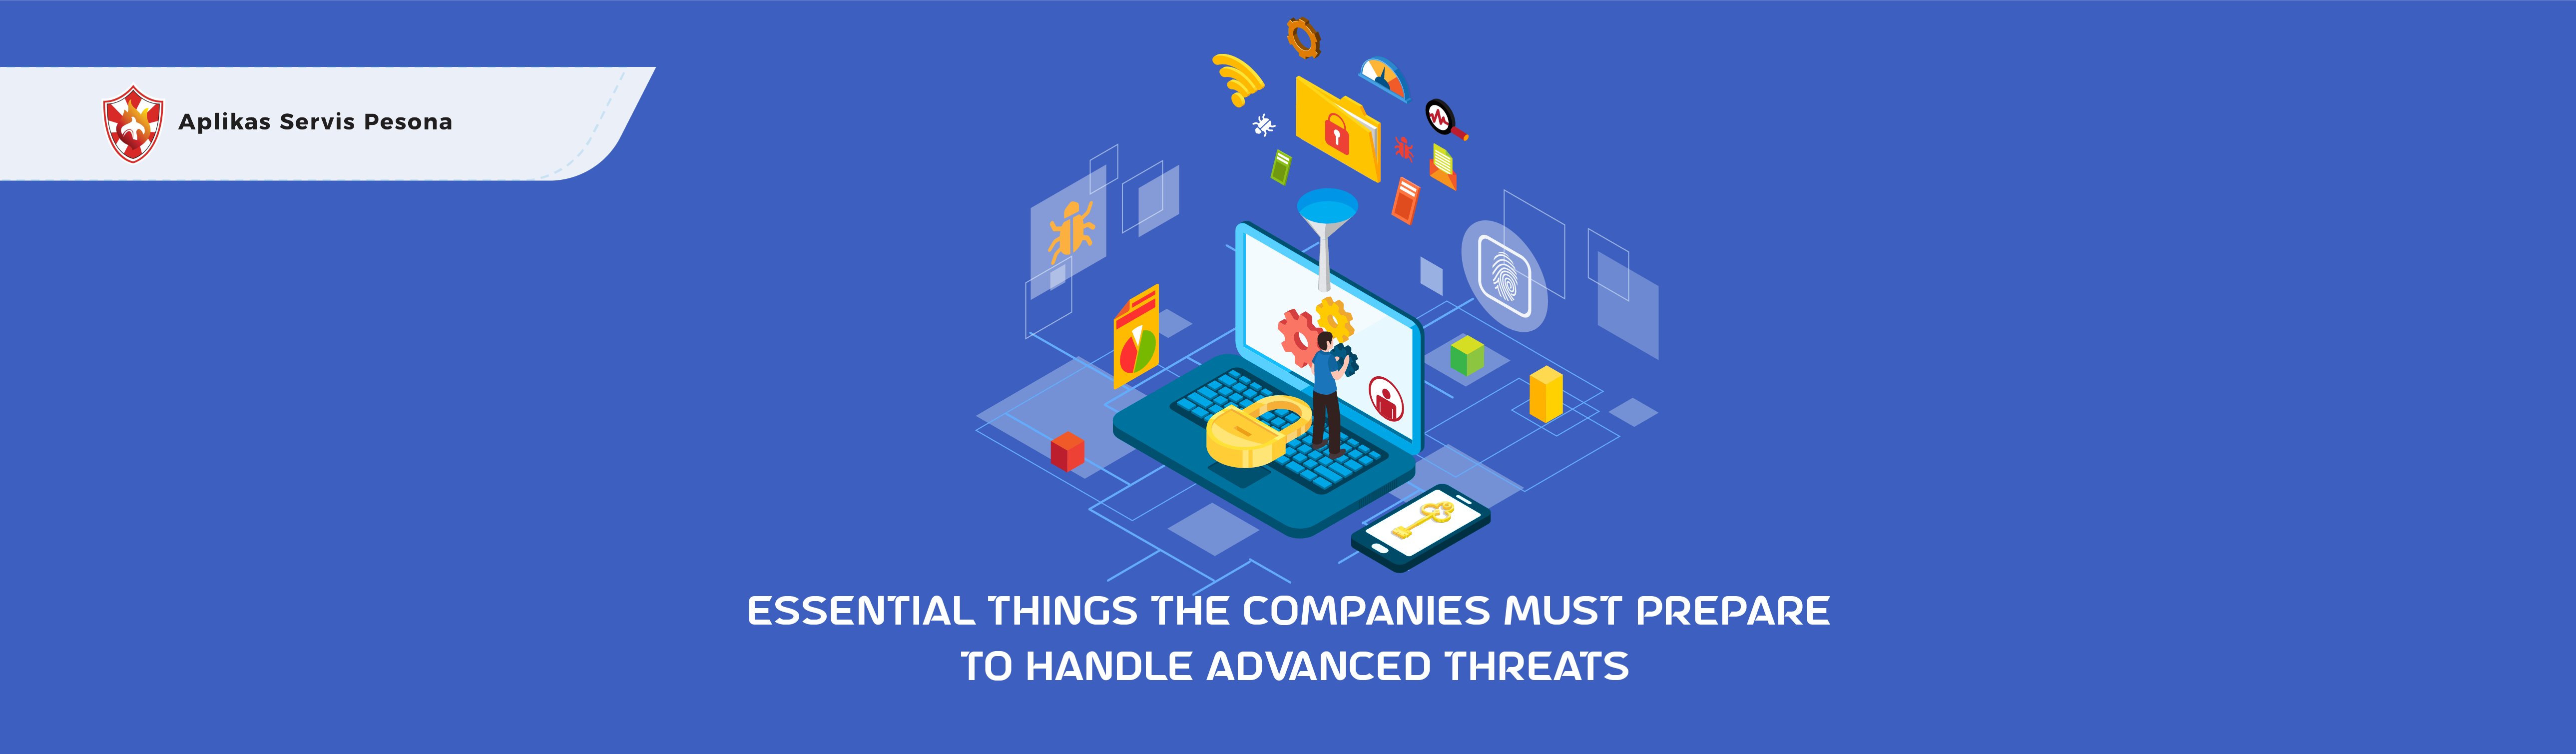 4 Essential Things the Companies Must Prepare to Handle Advanced Threats